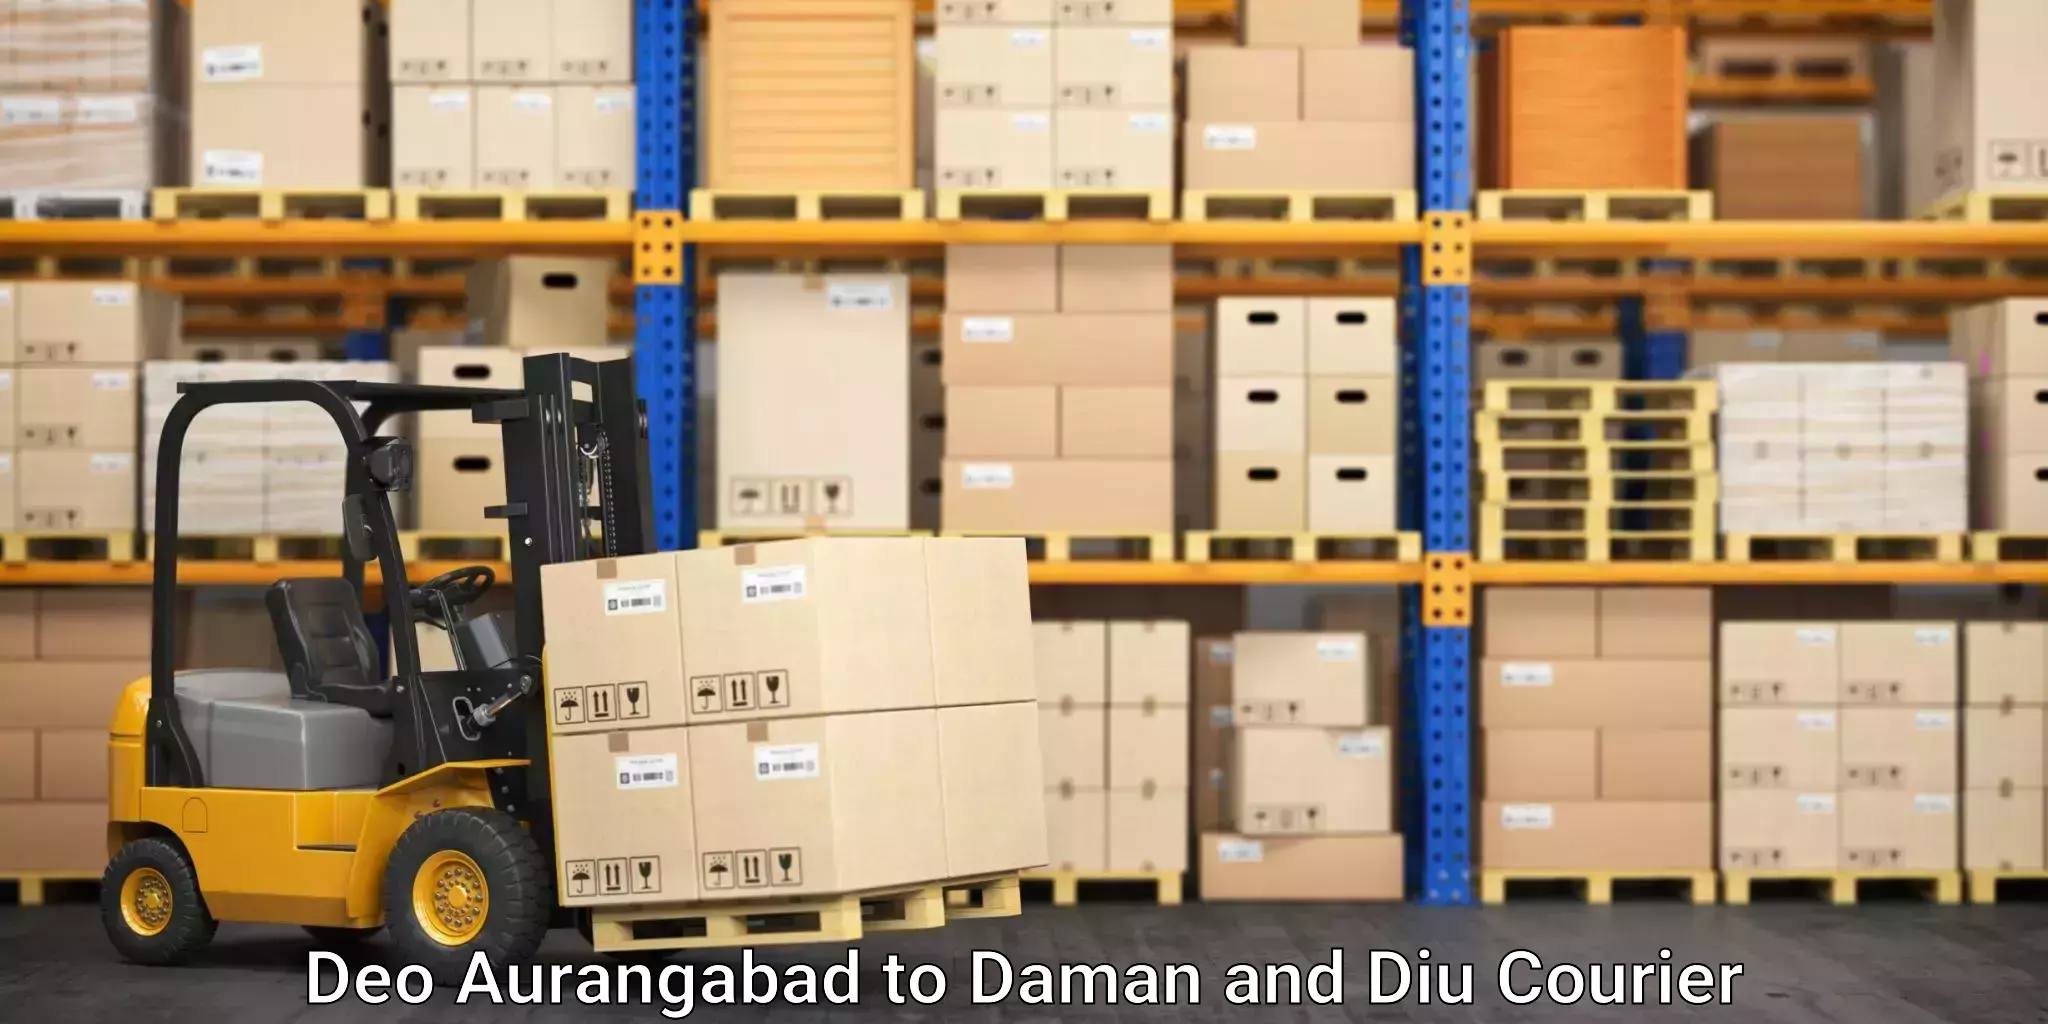 Furniture delivery service Deo Aurangabad to Daman and Diu